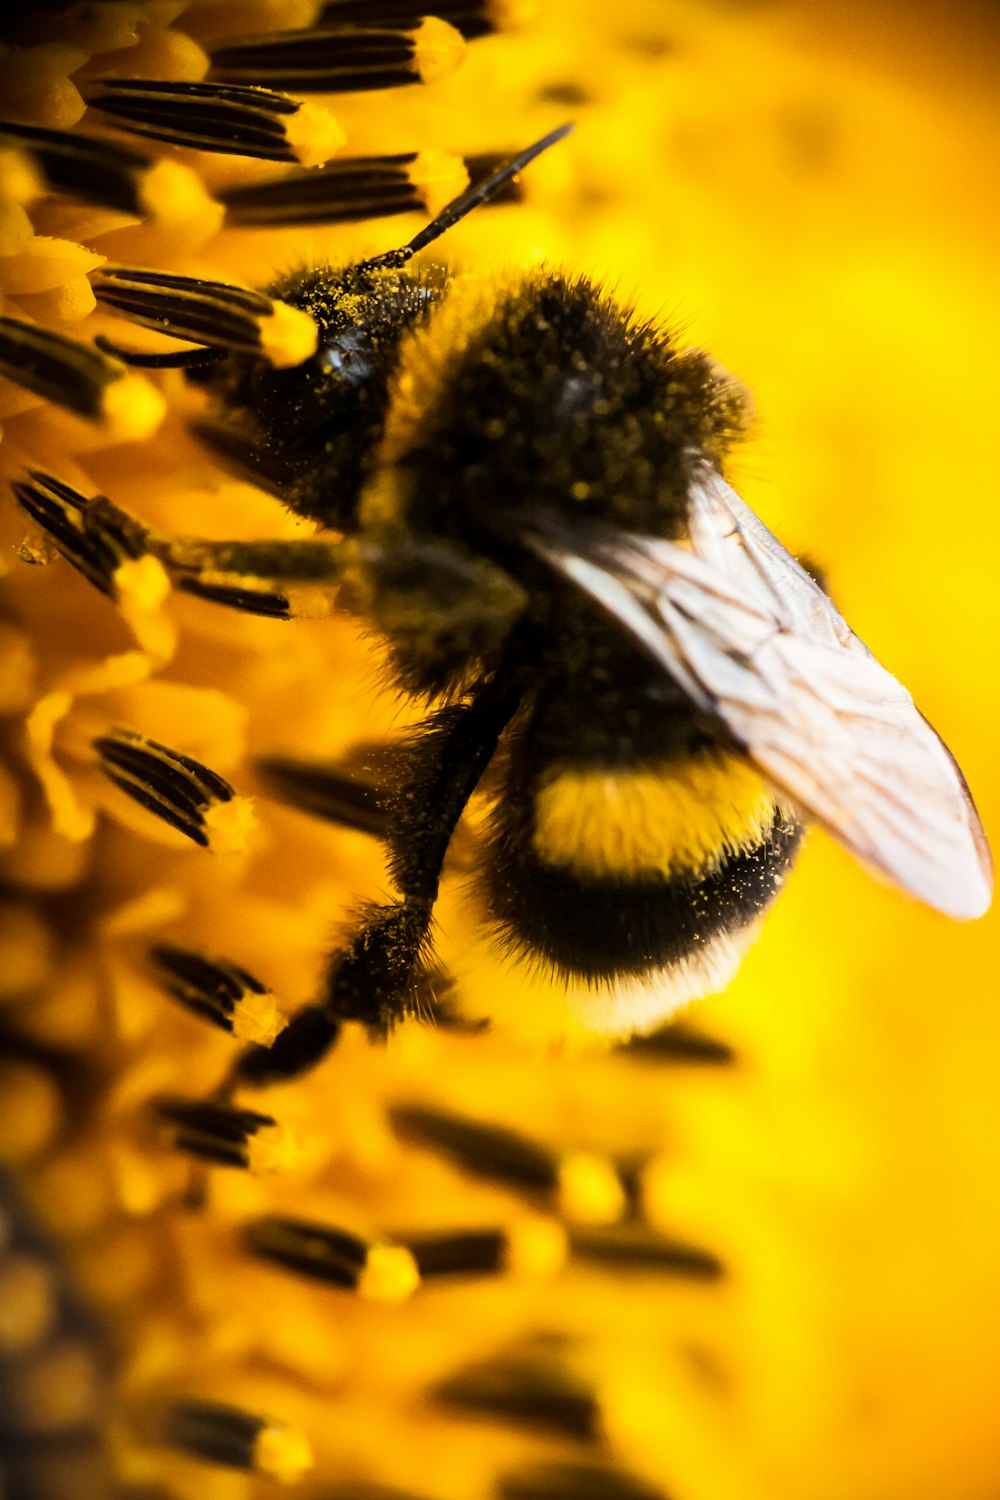 a close up of a bee on a sunflower